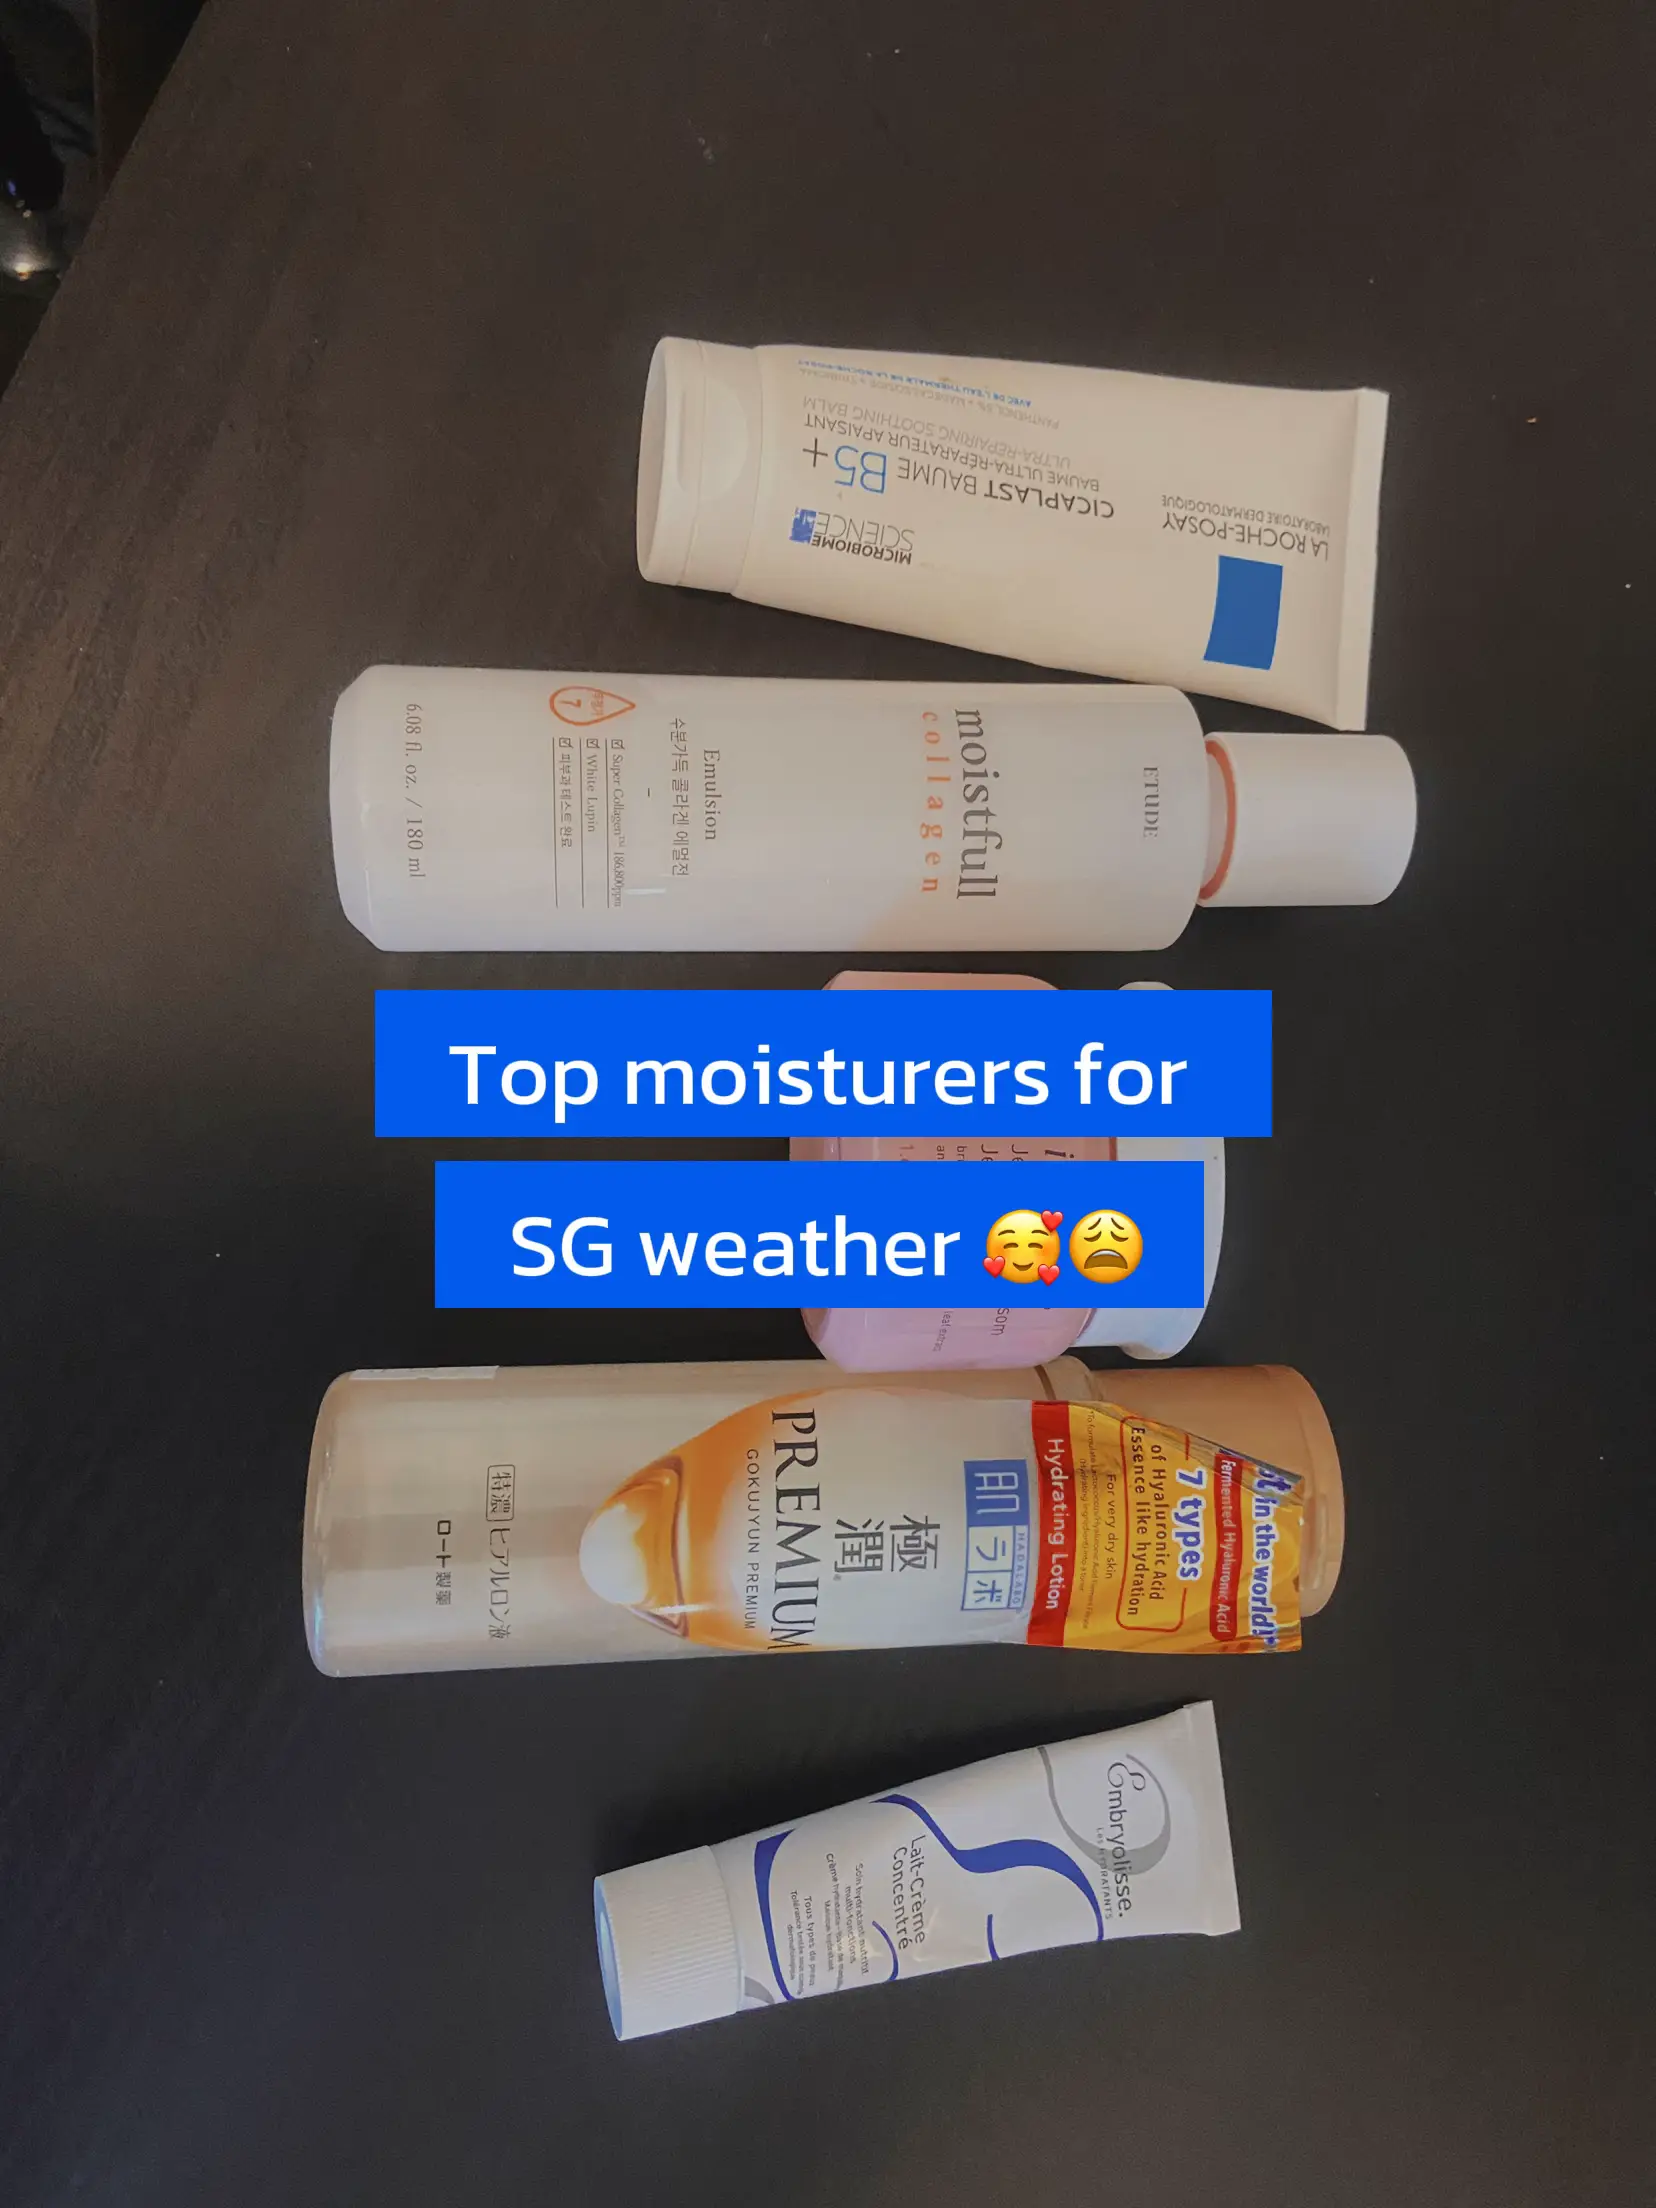 Top moisturers for SG weather 🥰😩's images(0)